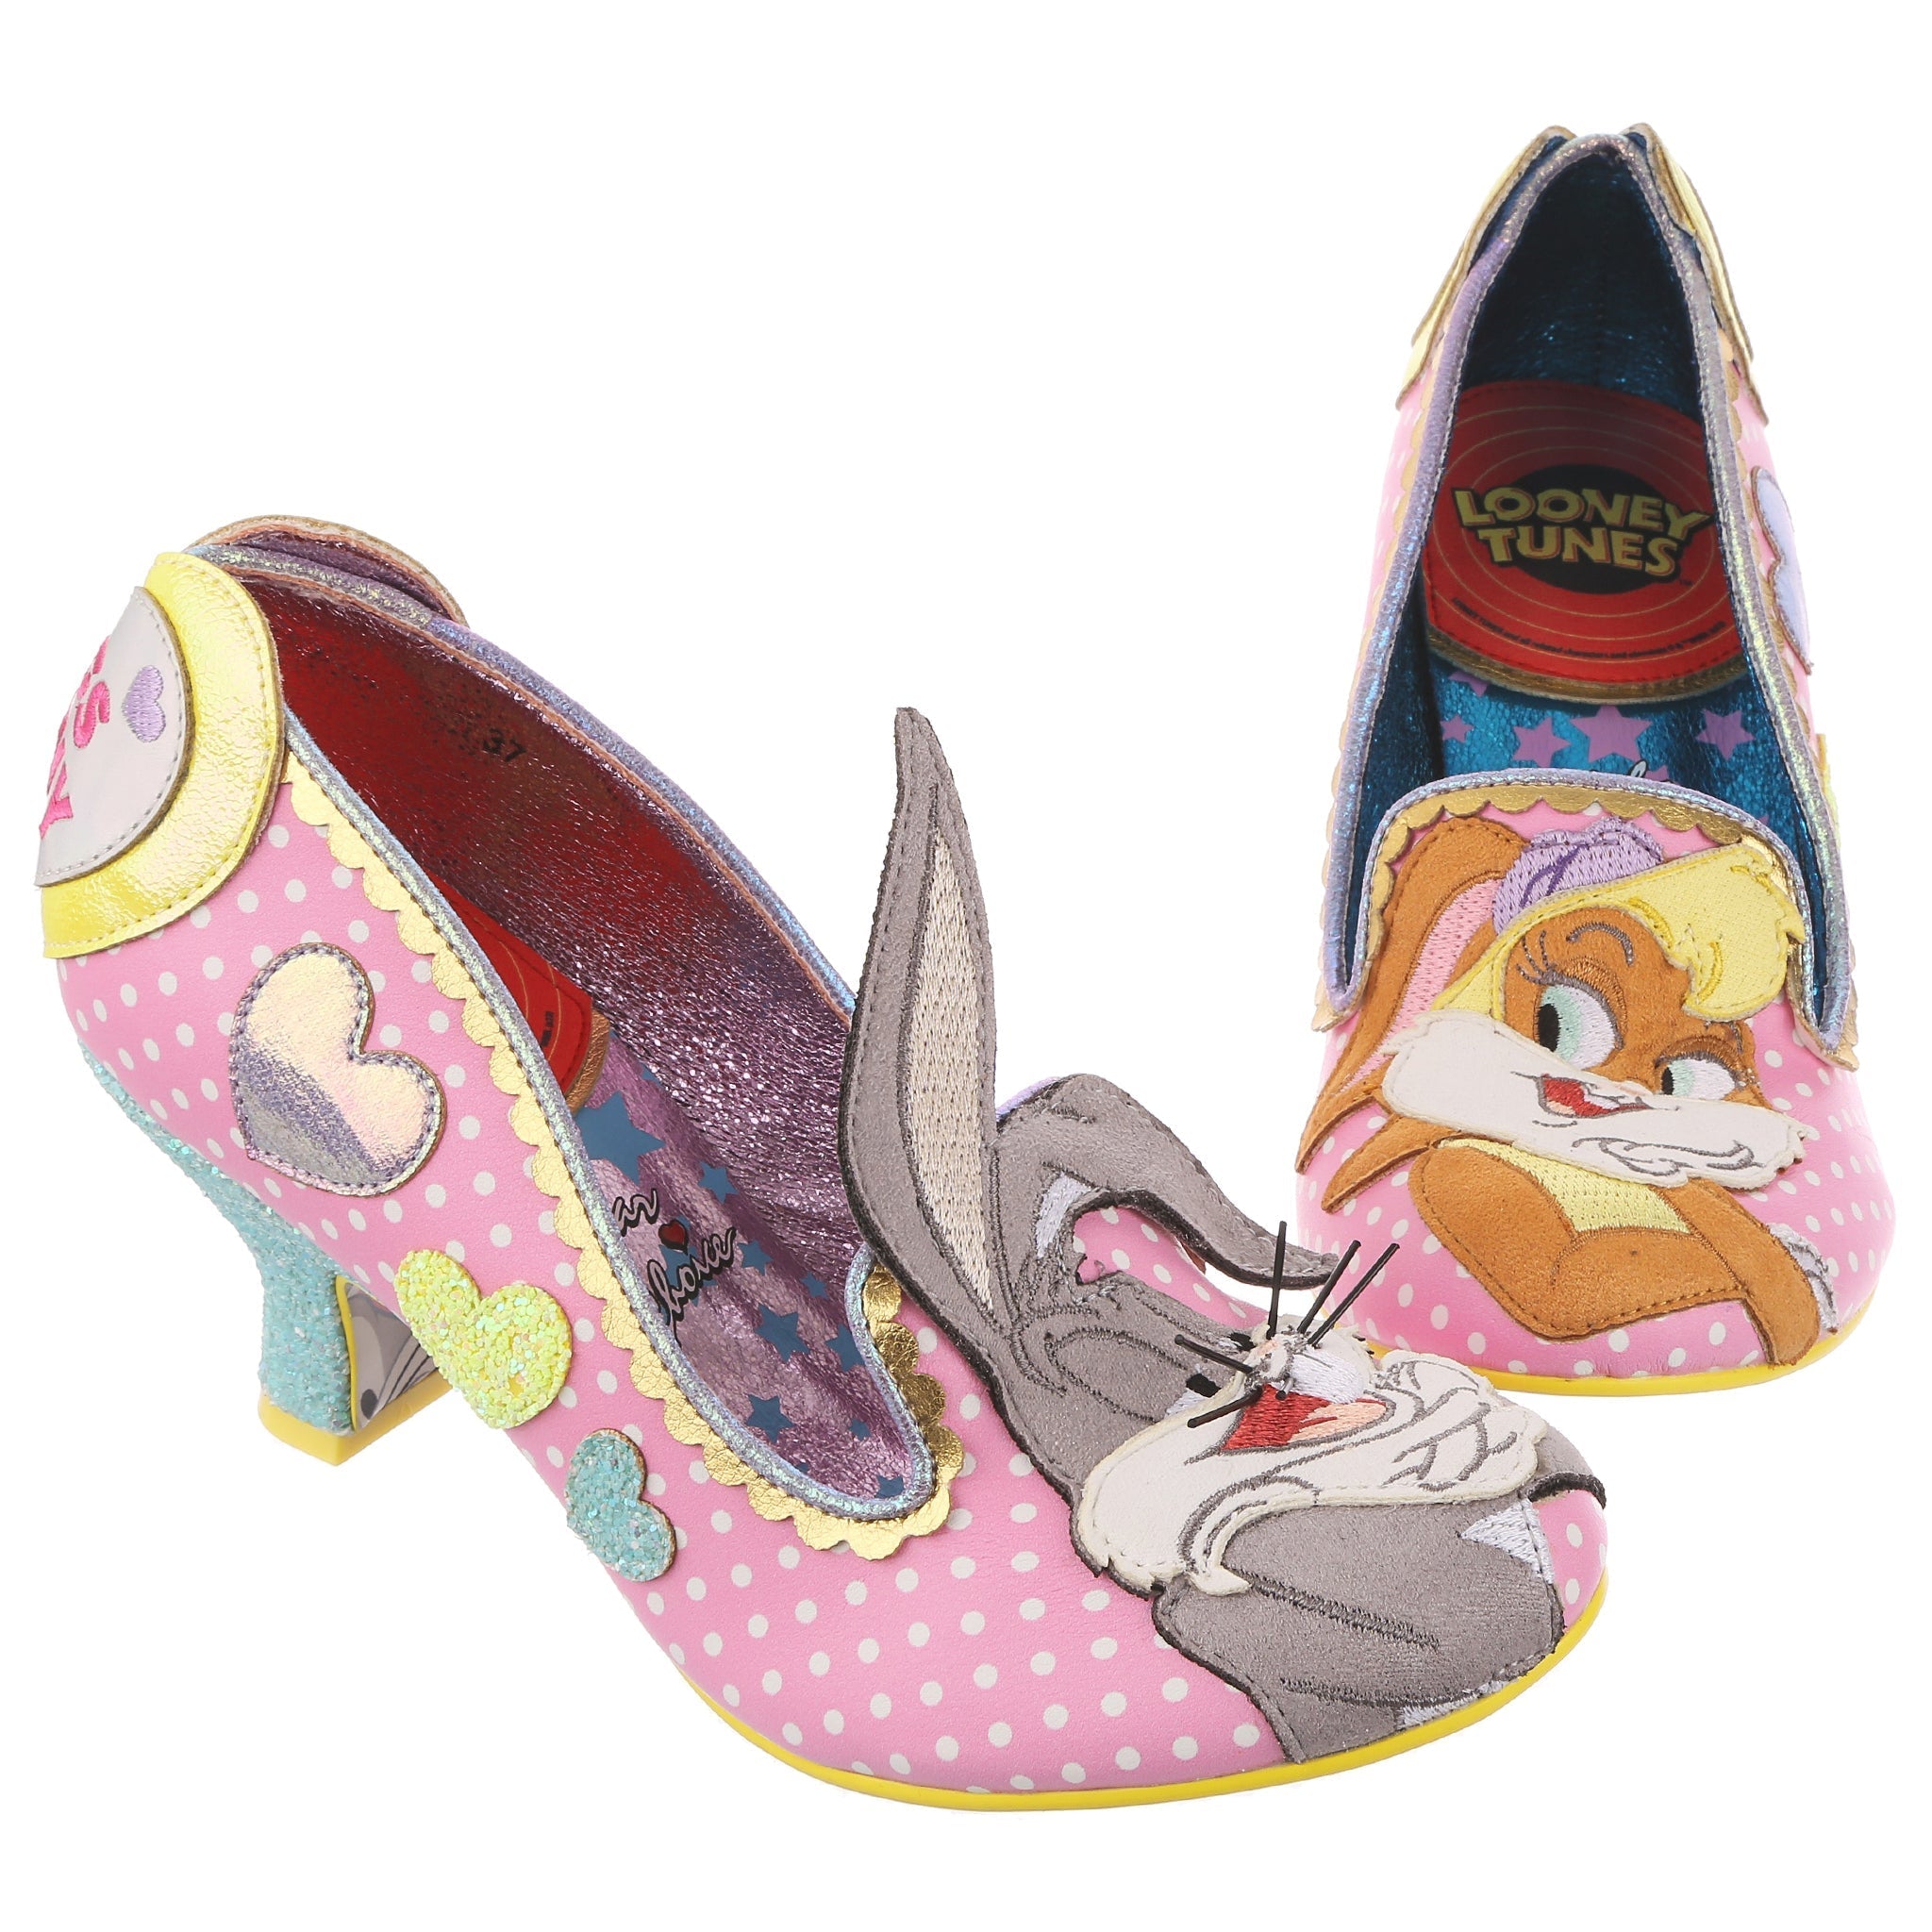 A pink and white polka dot with pastel glitter hearts, gold scalloping and Bugs Bunny appliqued on the right toe and Lola Bunny on the left toe. At the heel are hearts embroidered with their names inside, and a light blue glitter mid heel.